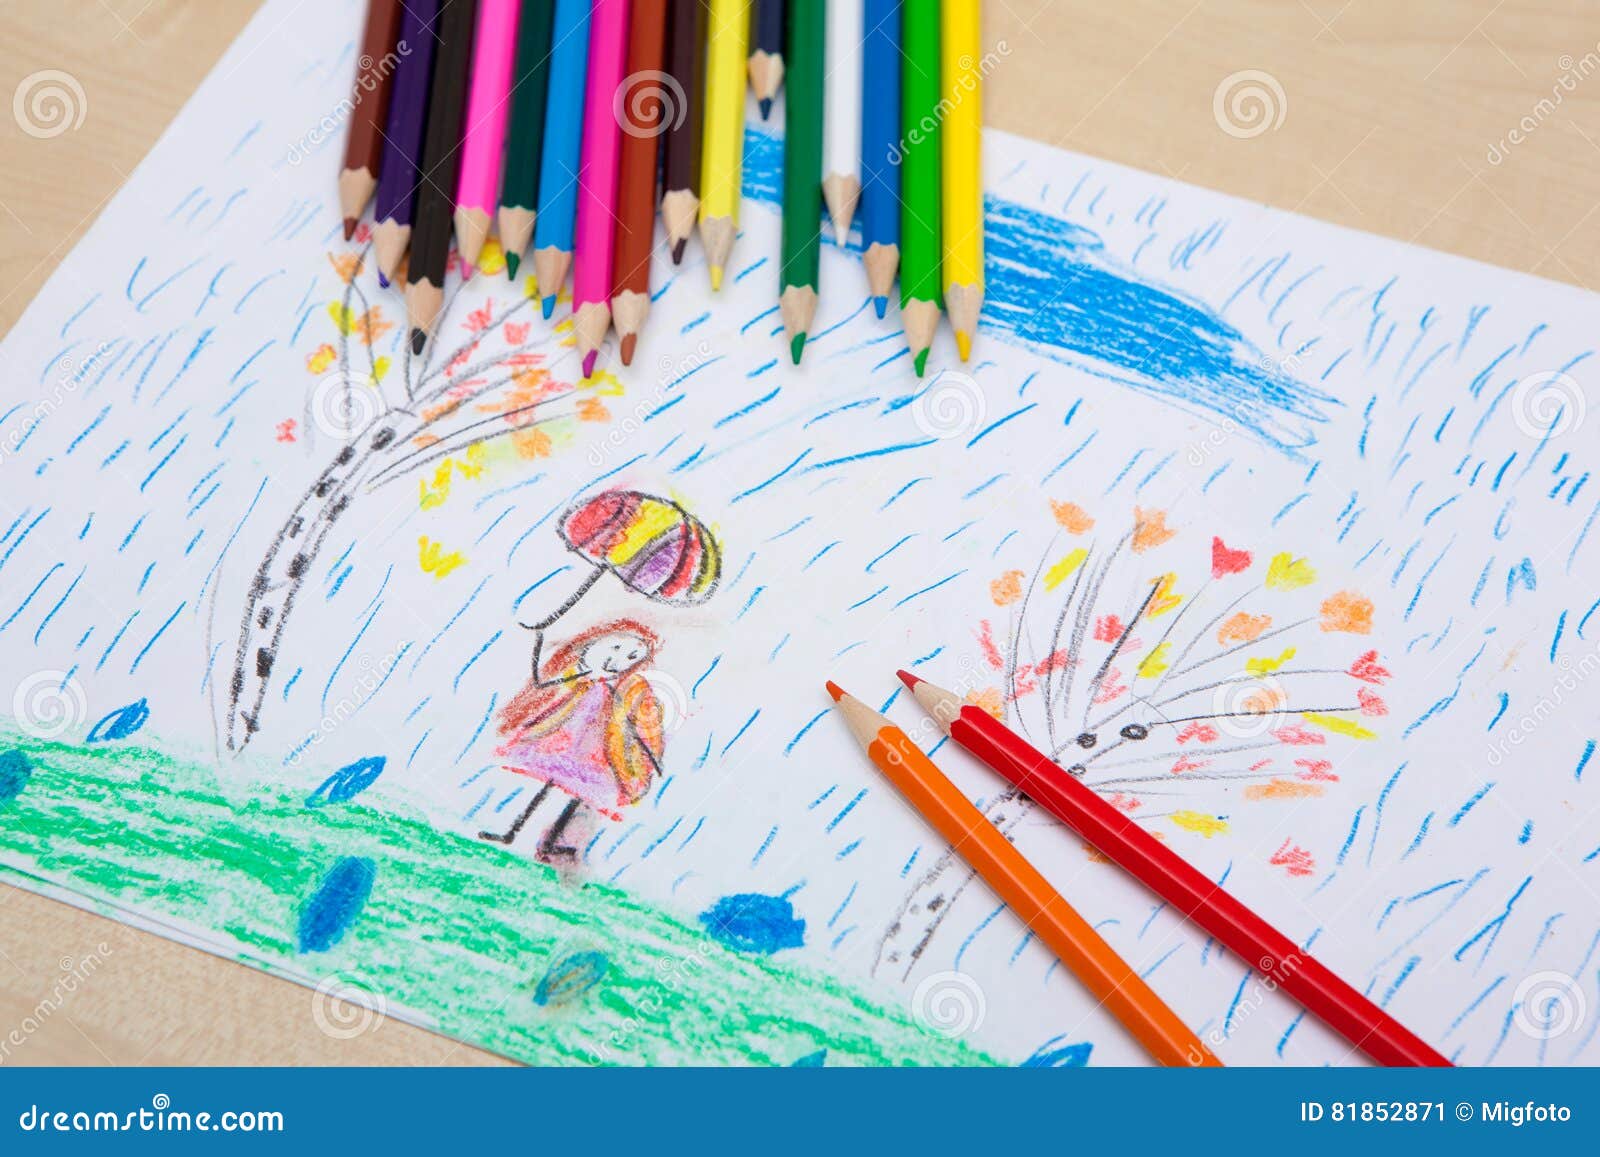 Children`s Drawing Pencils. Stock Image - Image of drawing, little